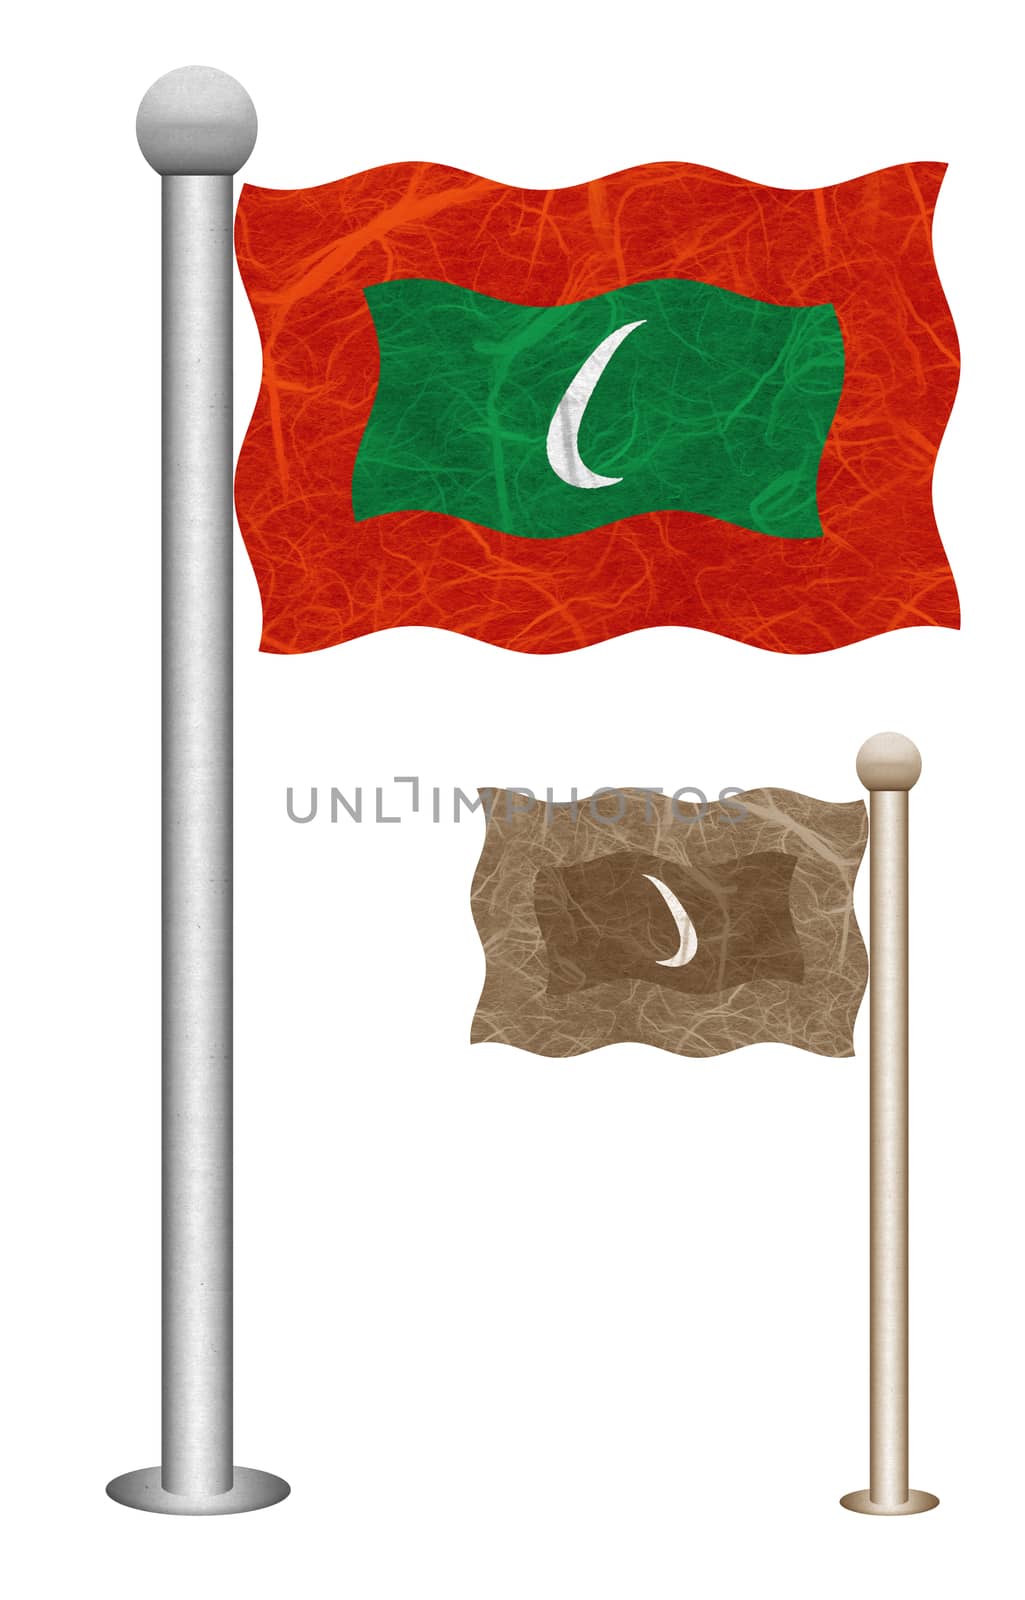 Maldives flag waving on the wind. Flags of countries in Asia. Mulberry paper on white background.